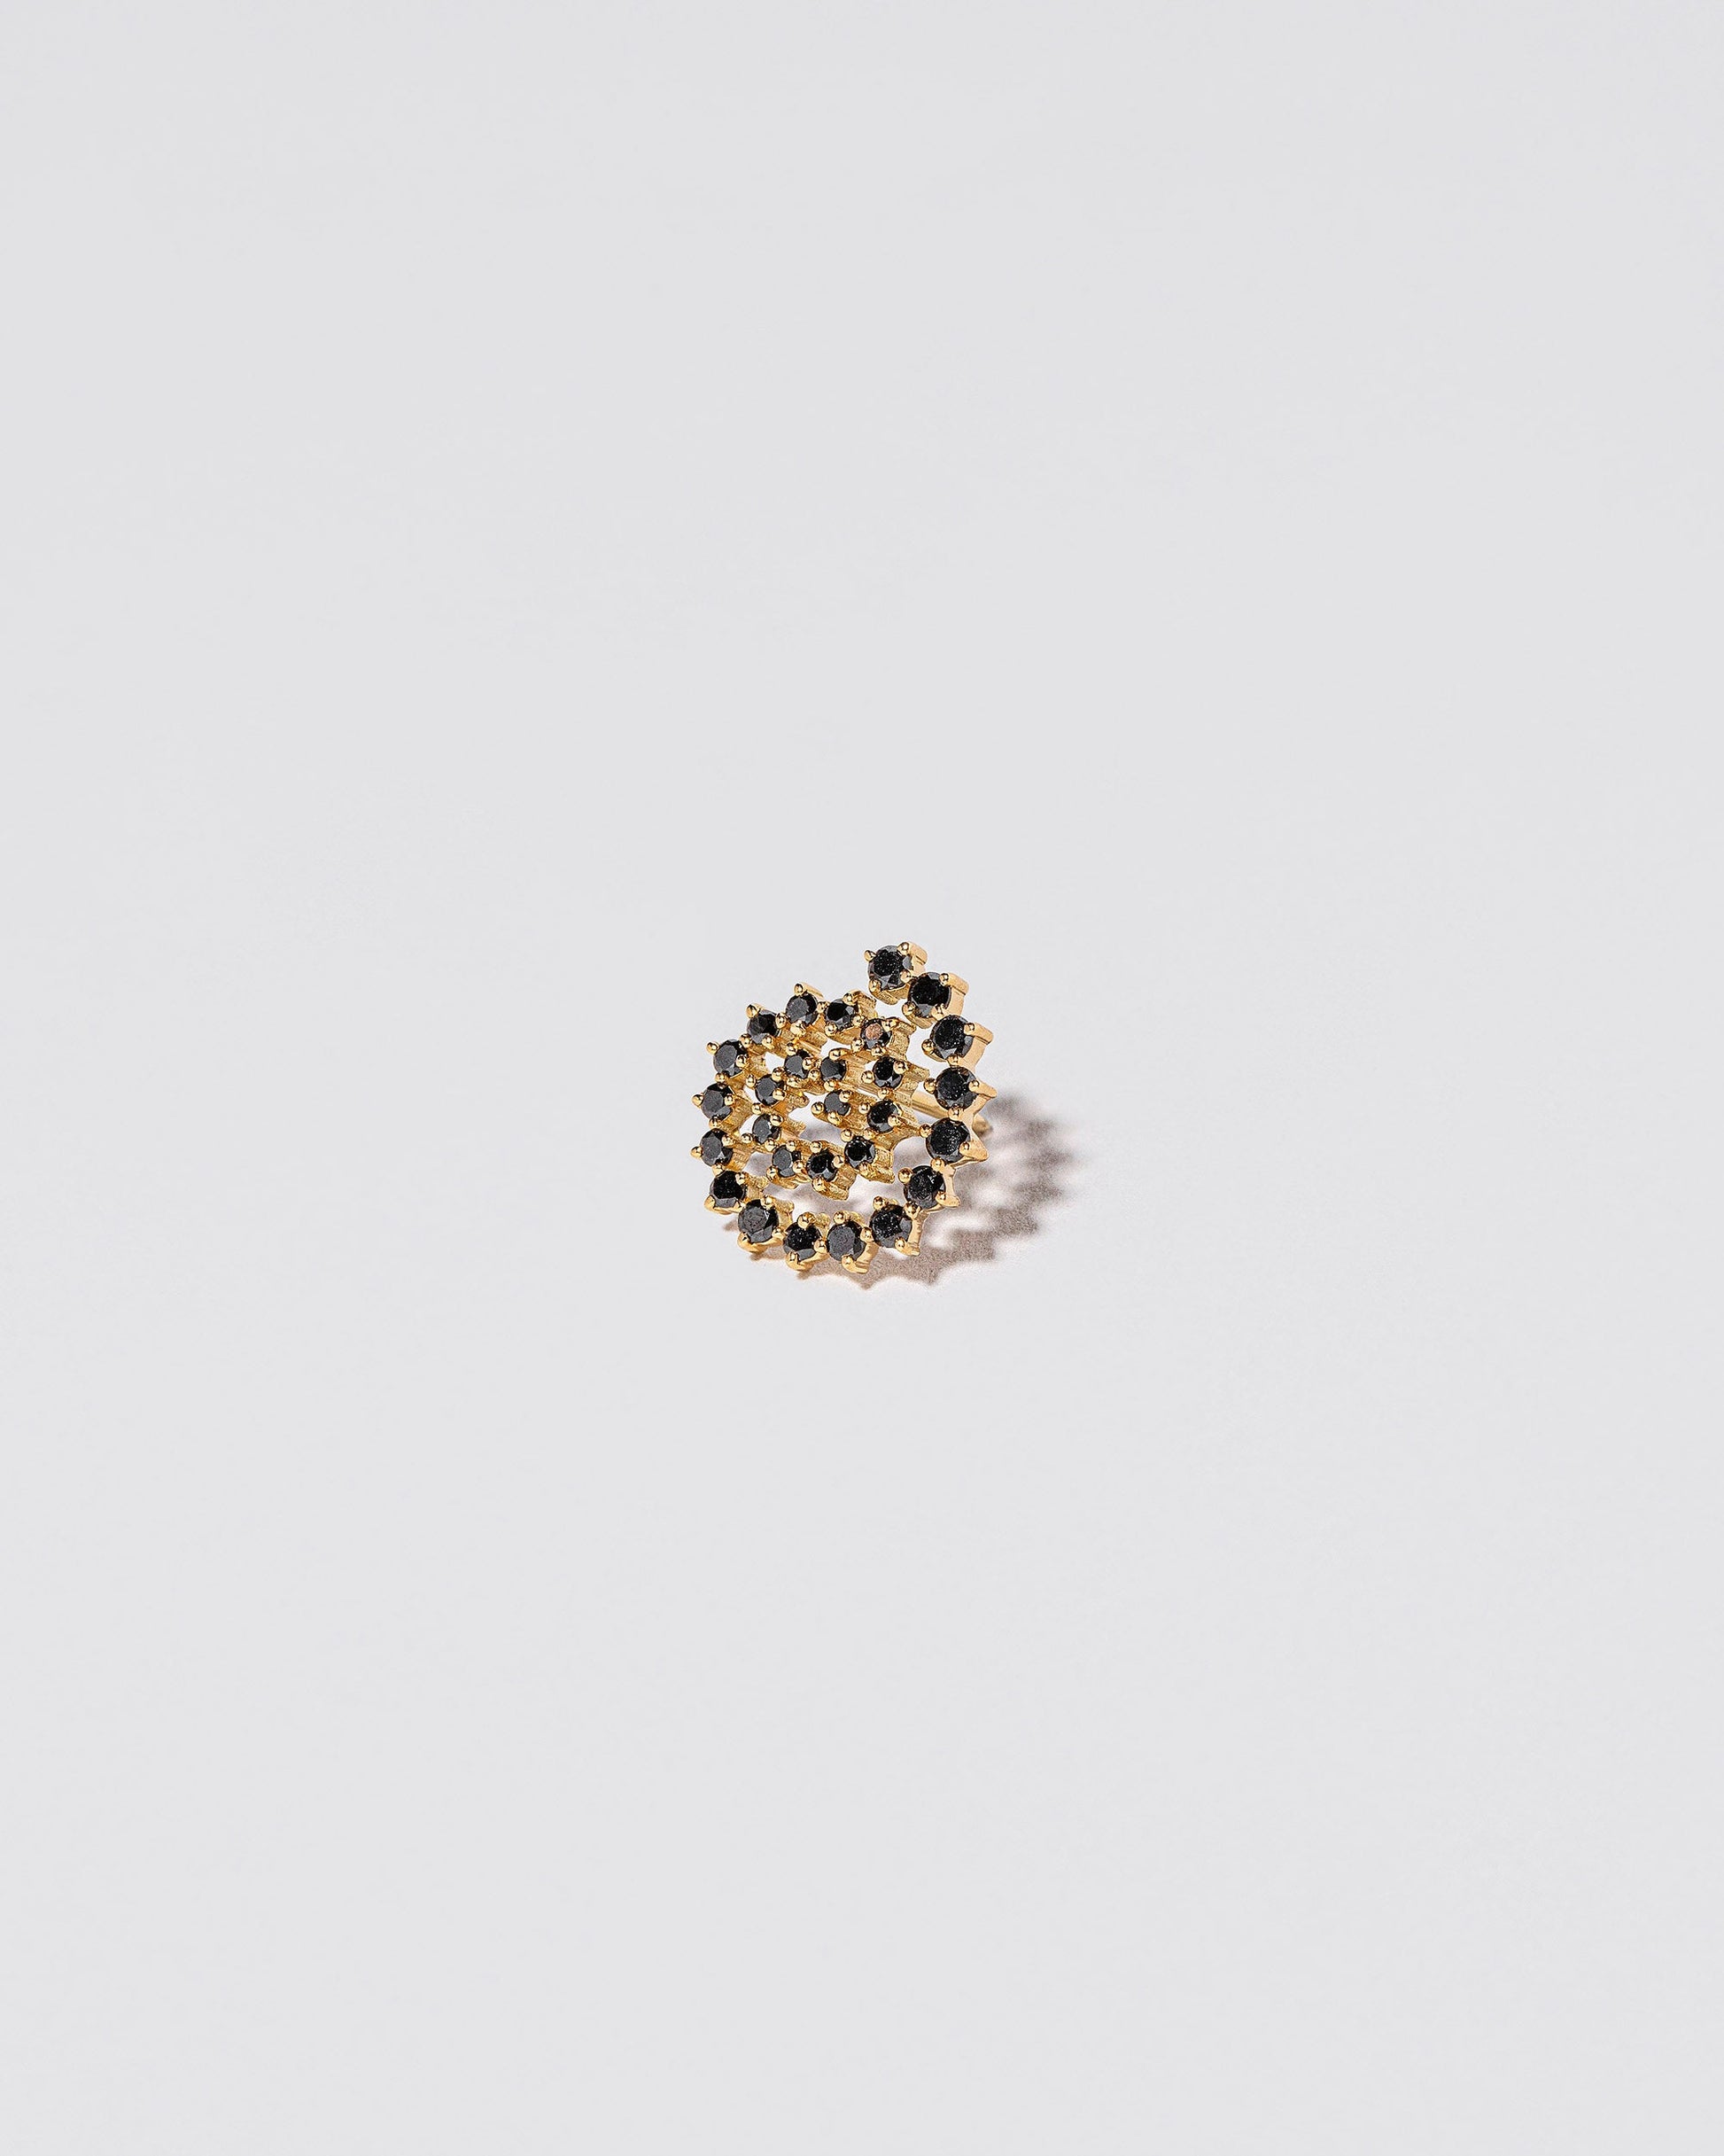 Spiral Earring Single Stud on light colored background.